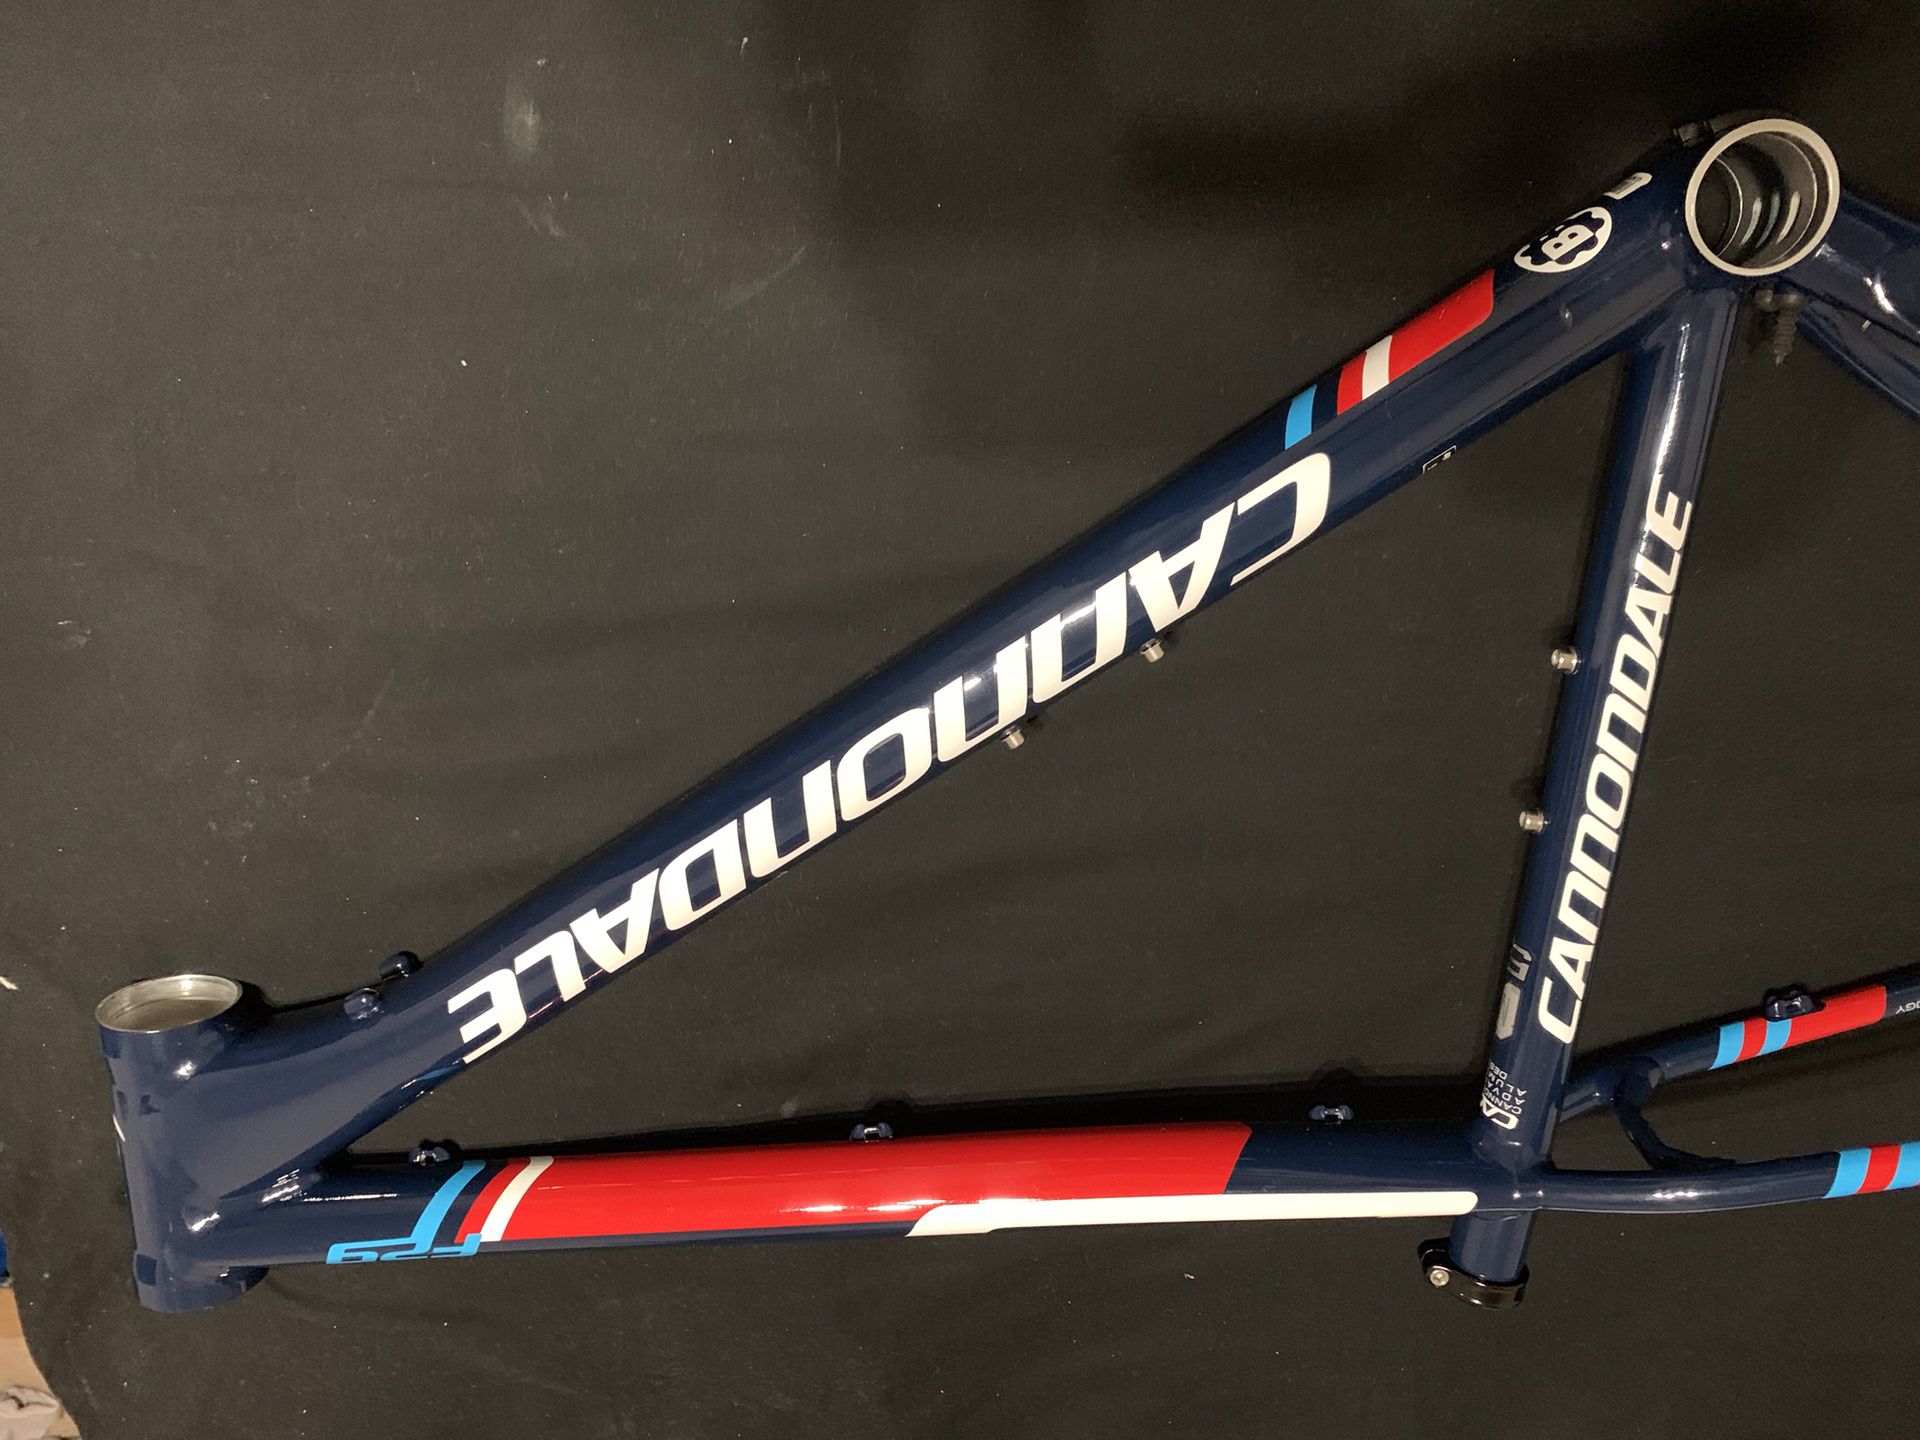 periscoop Mooie jurk Componist 2014 Cannondale F29 5 Medium frame for Sale in Texas City, TX - OfferUp